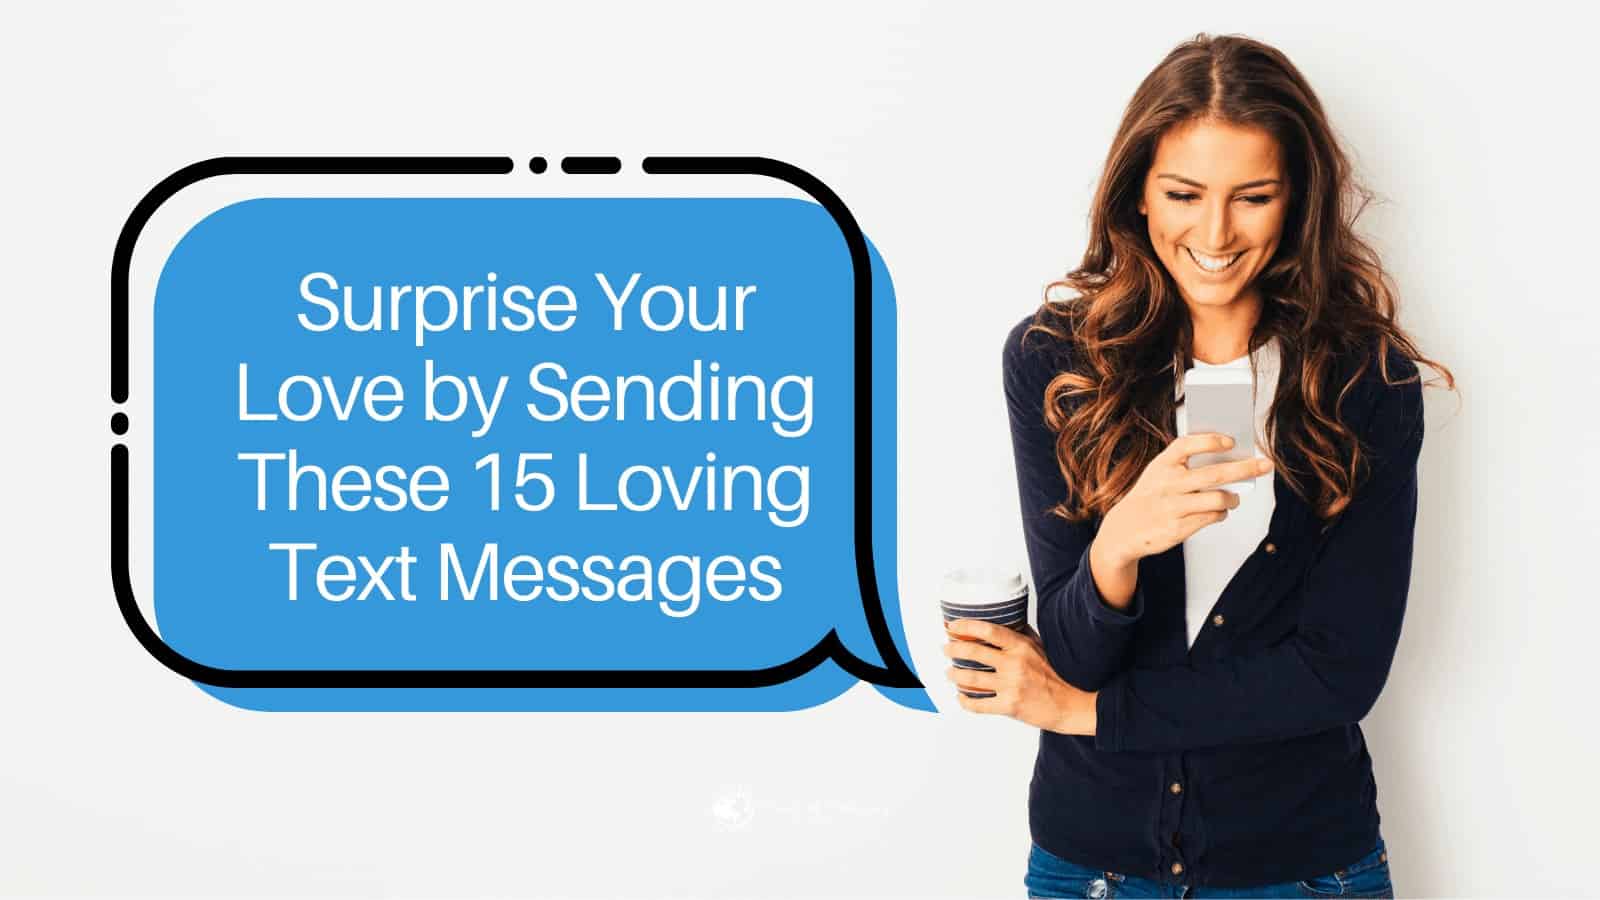 Surprise Your Love by Sending These 15 Loving Text Messages